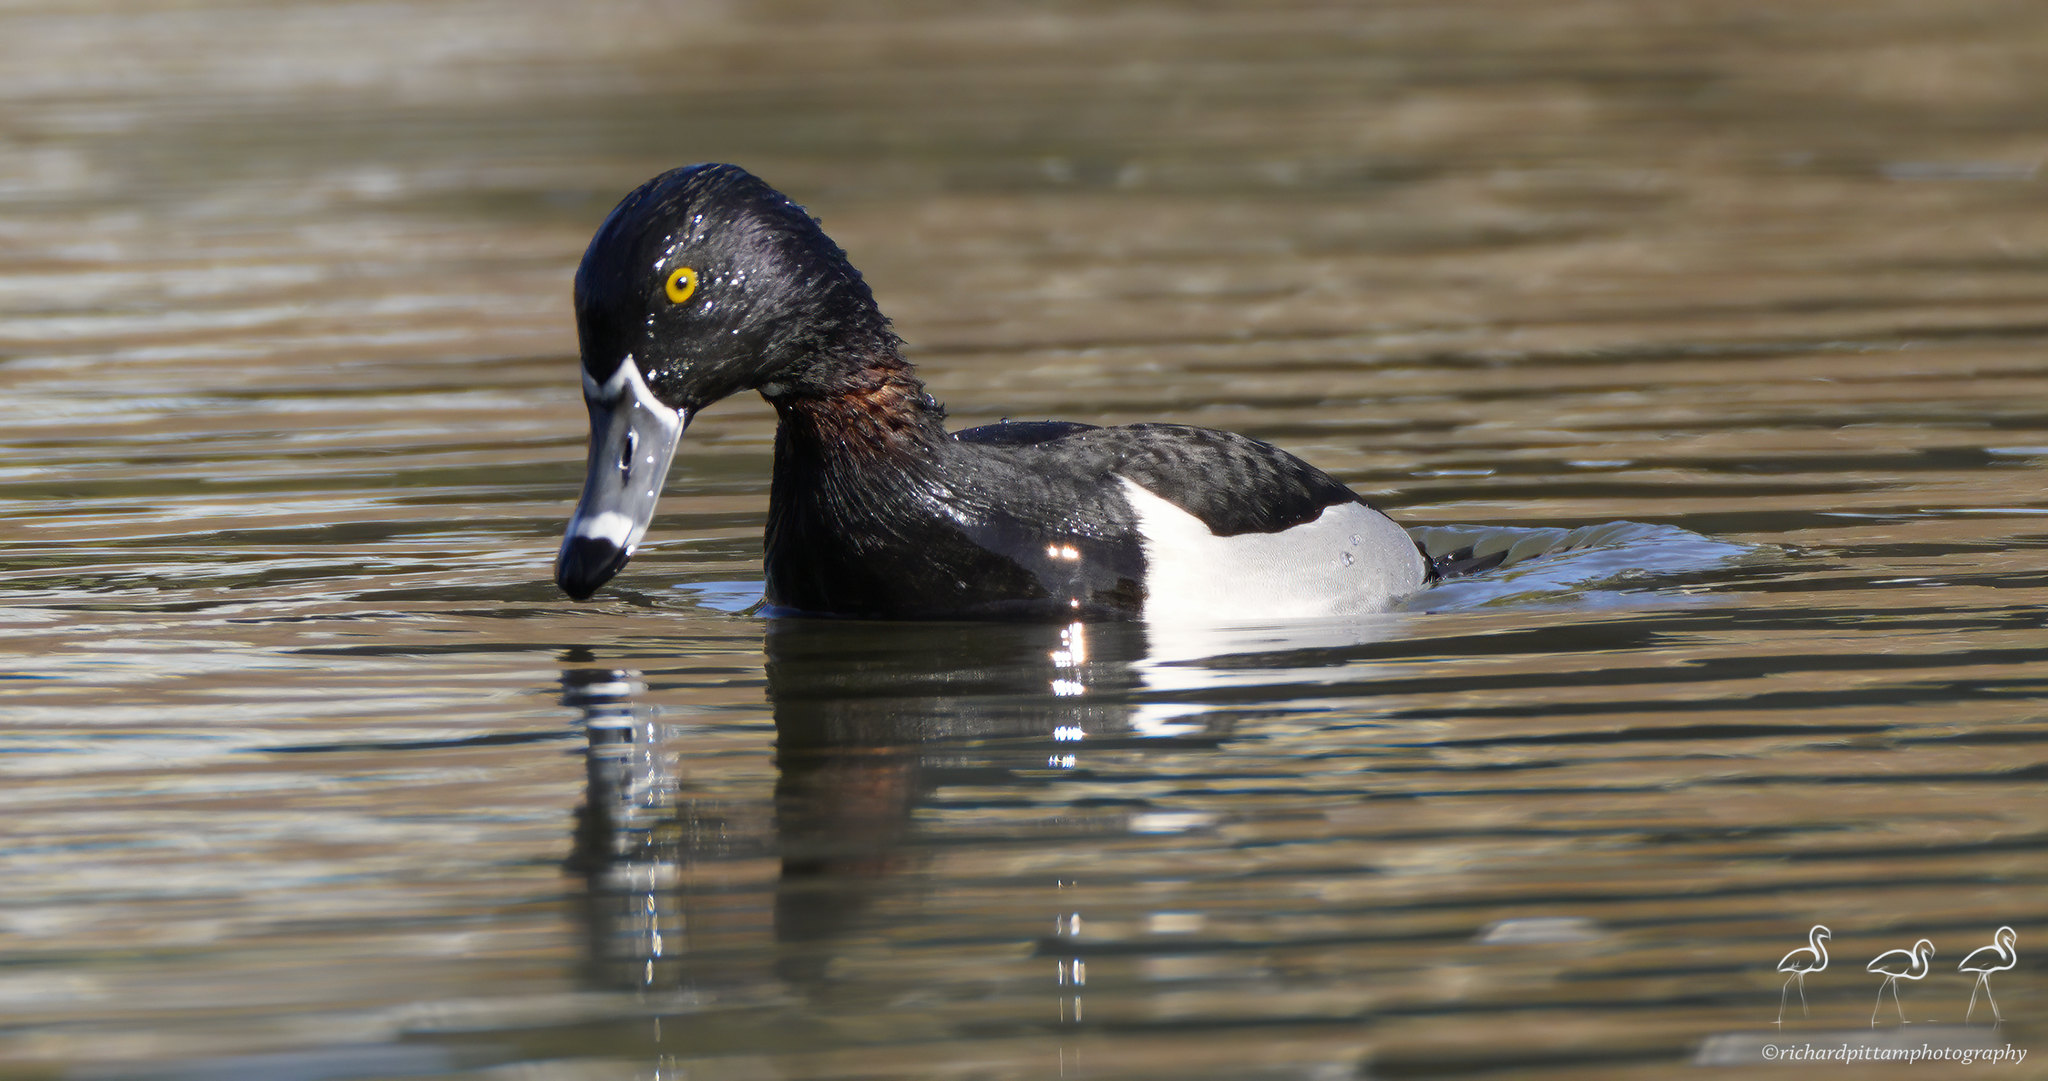 Ring-necked Duck - messing with zoom function - not enough shutter speed here, but just to show the 'ring' on the neck.